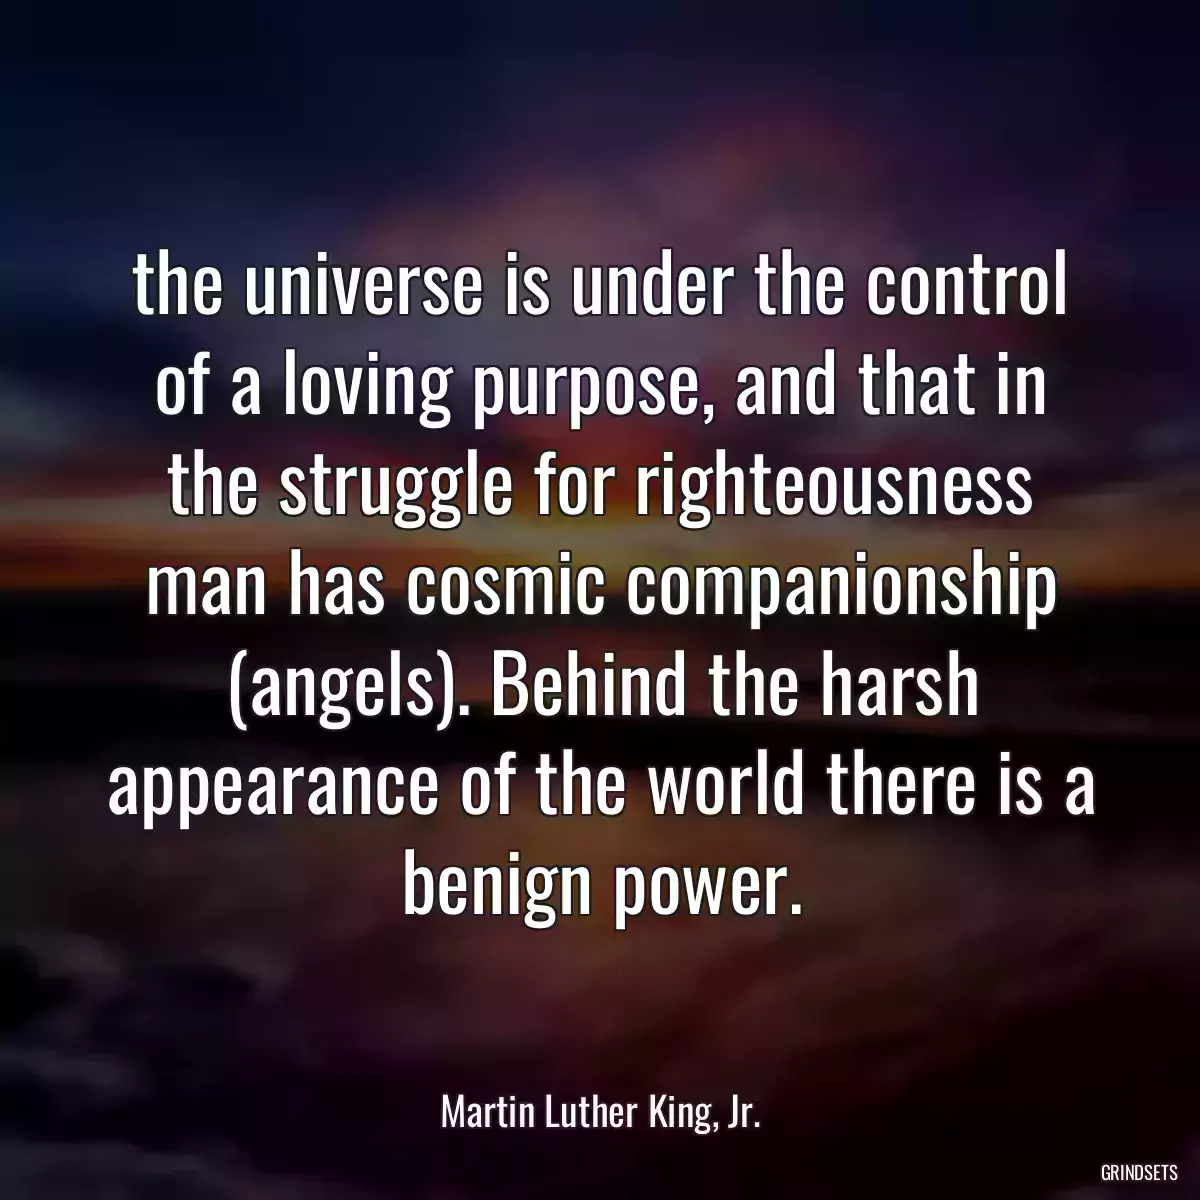 the universe is under the control of a loving purpose, and that in the struggle for righteousness man has cosmic companionship (angels). Behind the harsh appearance of the world there is a benign power.